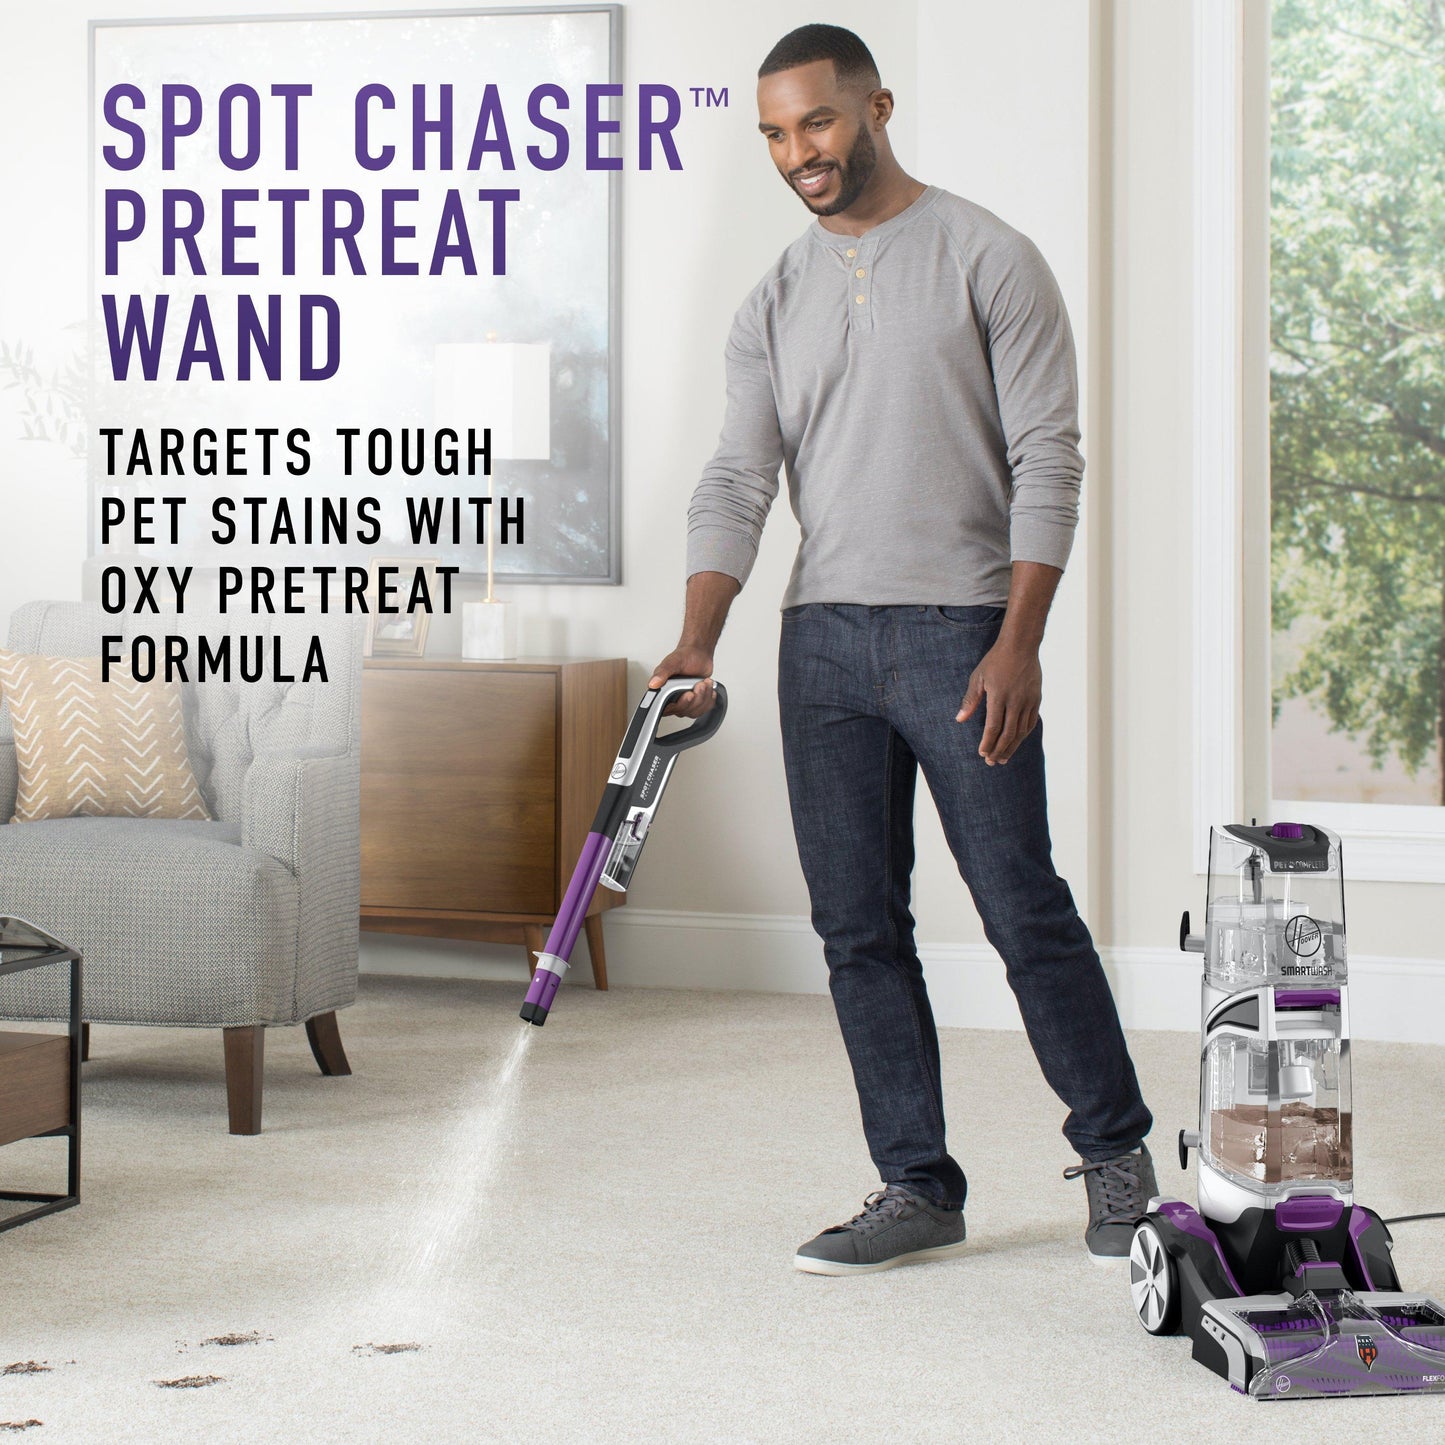 Man using carpet cleaner shows how the pretreat wand helps clean muddy paw prints on white carpet